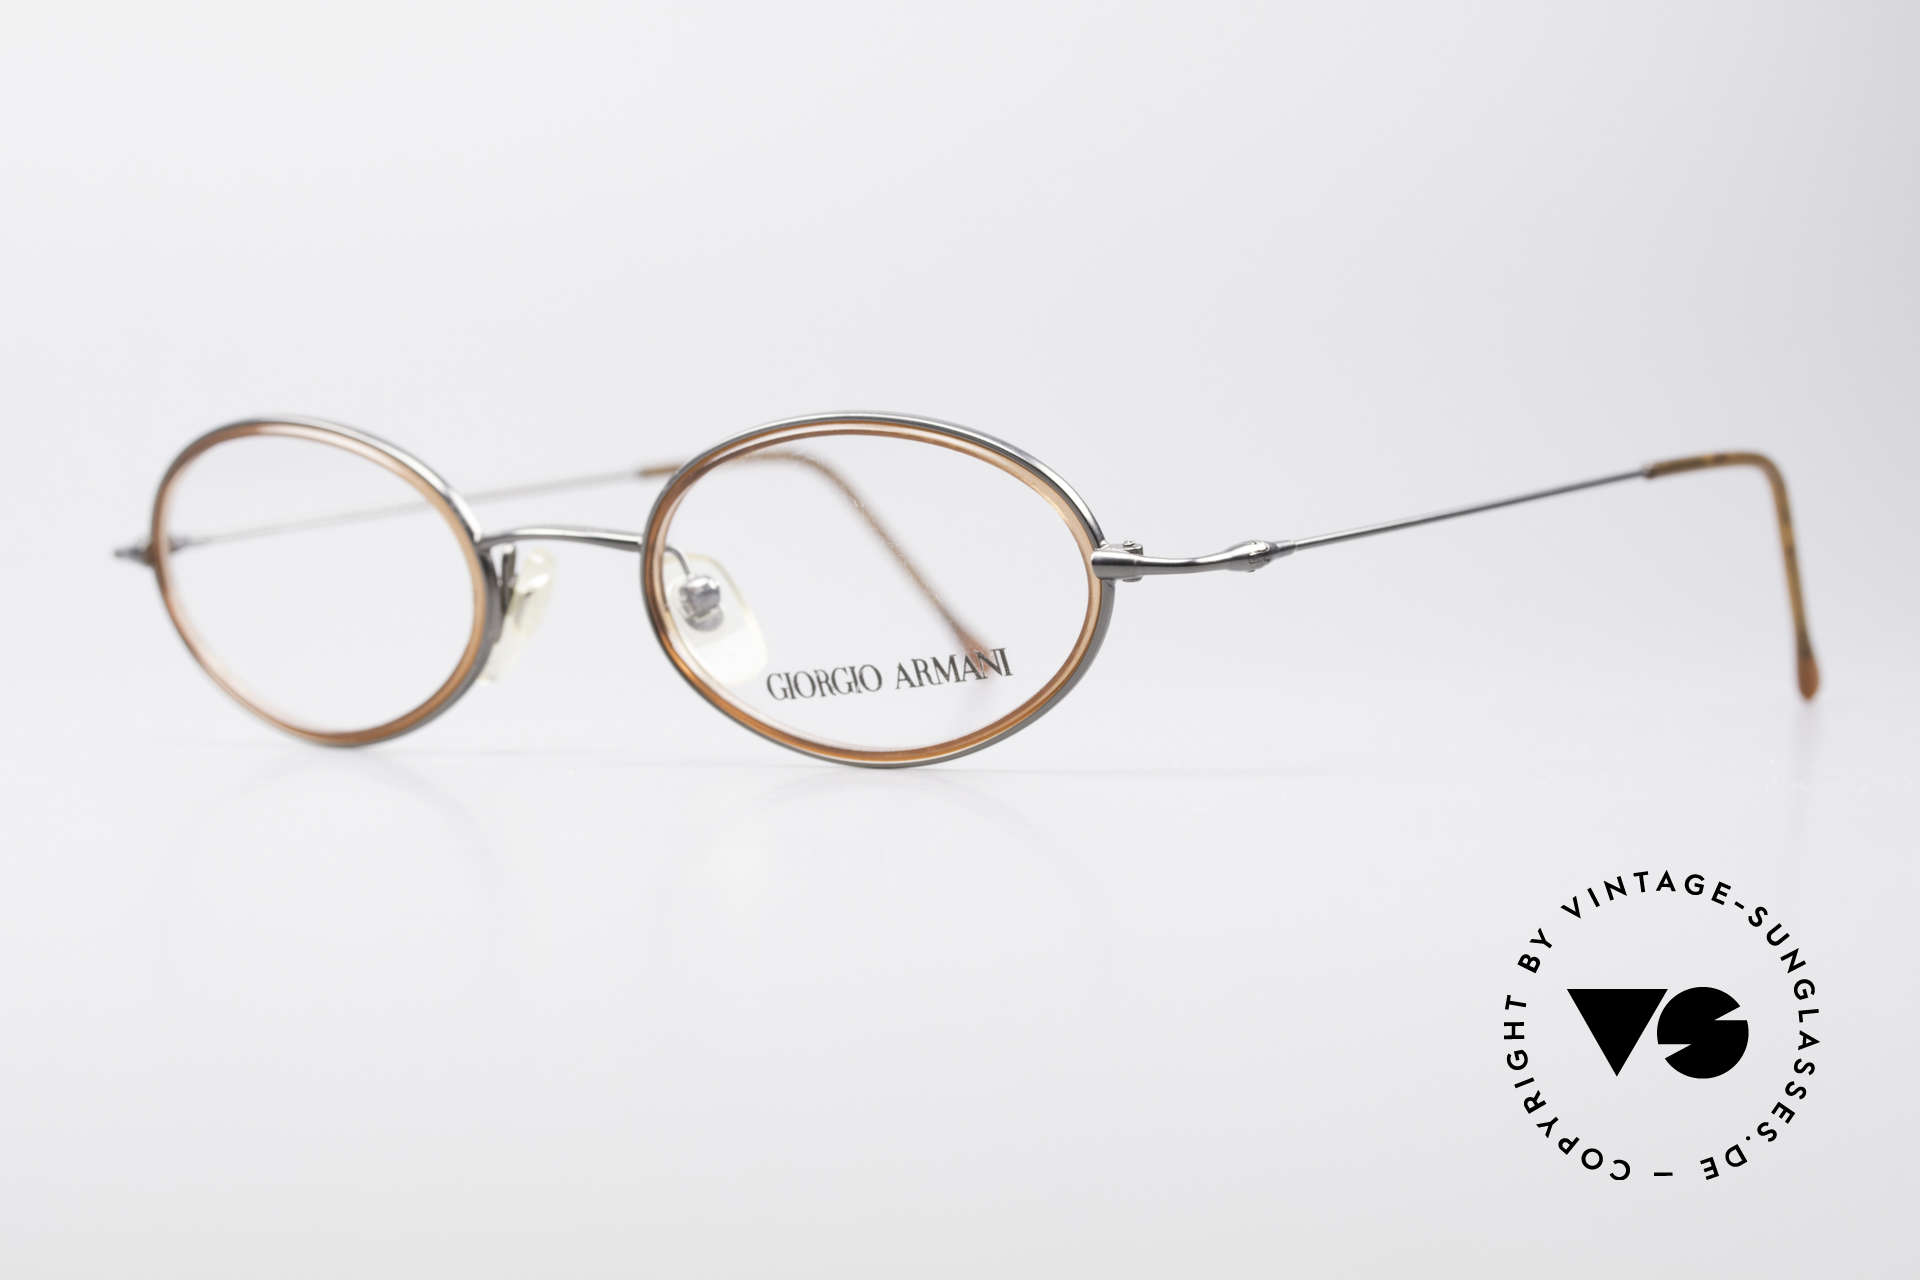 Giorgio Armani 1012 Oval Vintage Unisex Frame, sober, timeless style: suitable for many occasions, Made for Men and Women